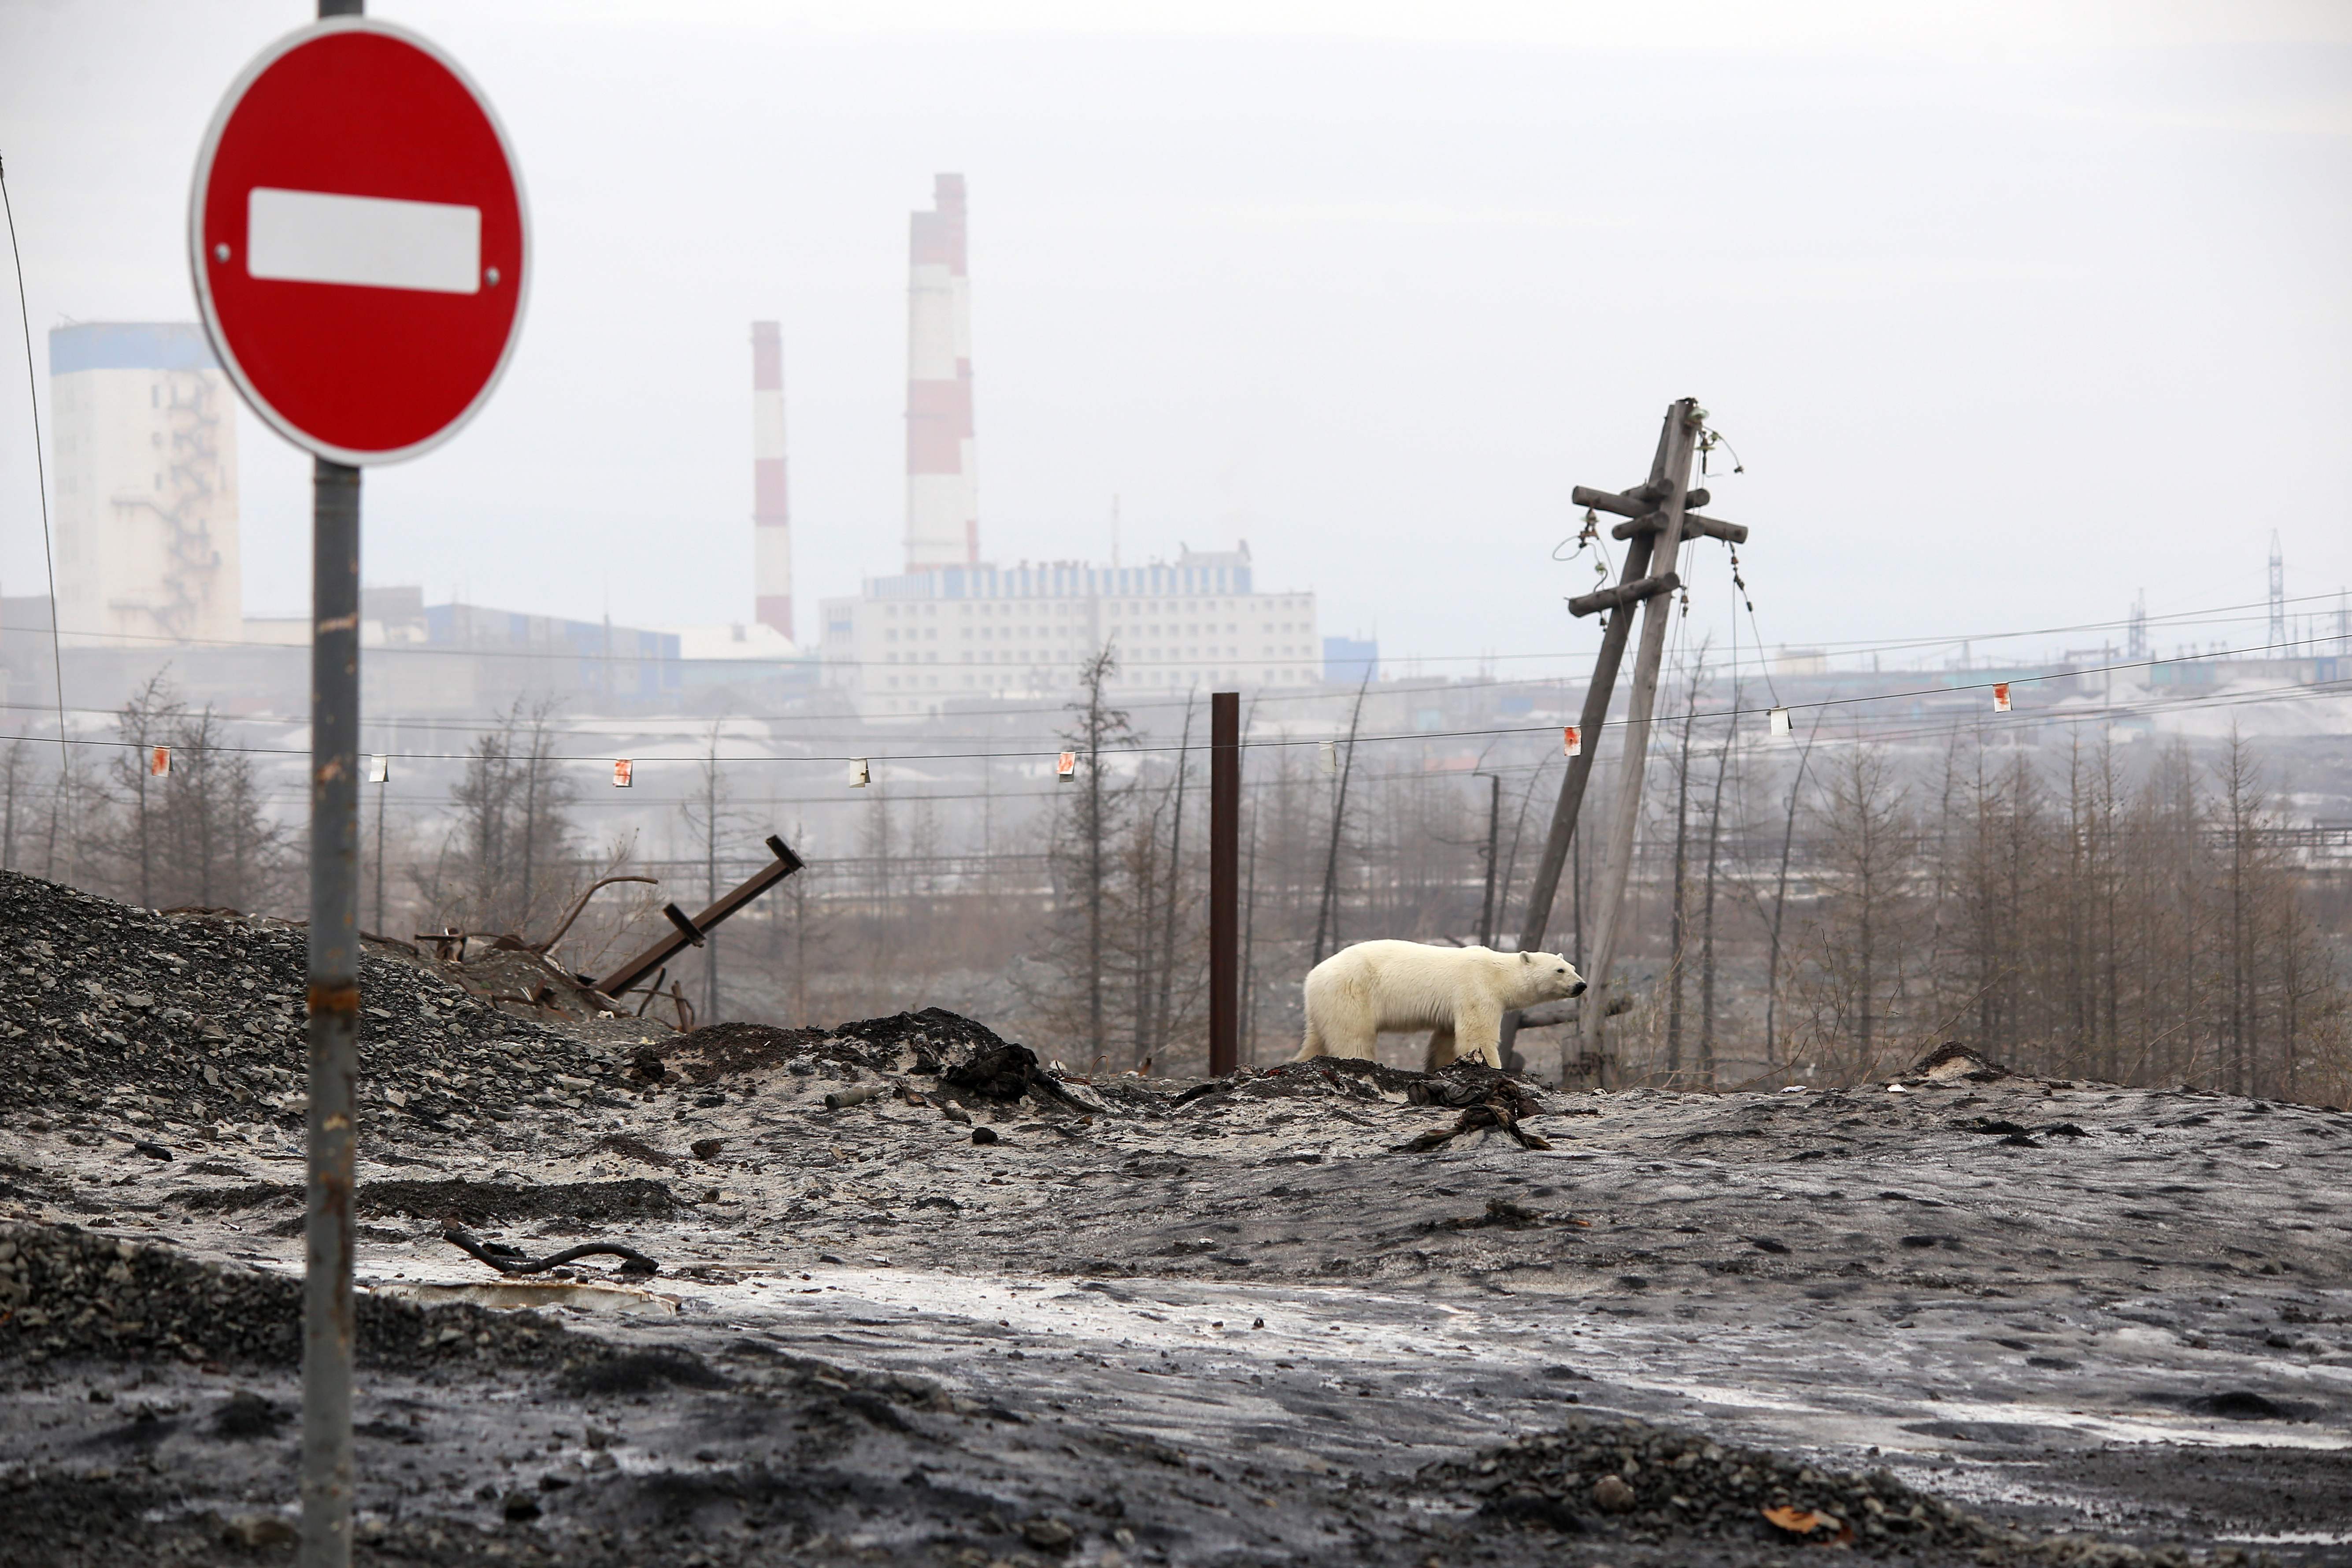 TOPSHOT - A stray polar bear is seen outside Oktyabrsky mine on the outskirts of the Russian industrial city of Norilsk on June 17, 2019. - A hungry polar bear has been spotted on the outskirts of Norilsk, hundreds of miles from its natural habitat, authorities said on June 18, 2019. (Photo by Irina YARINSKAYA / Zapolyarnaya pravda newspaper / AFP)